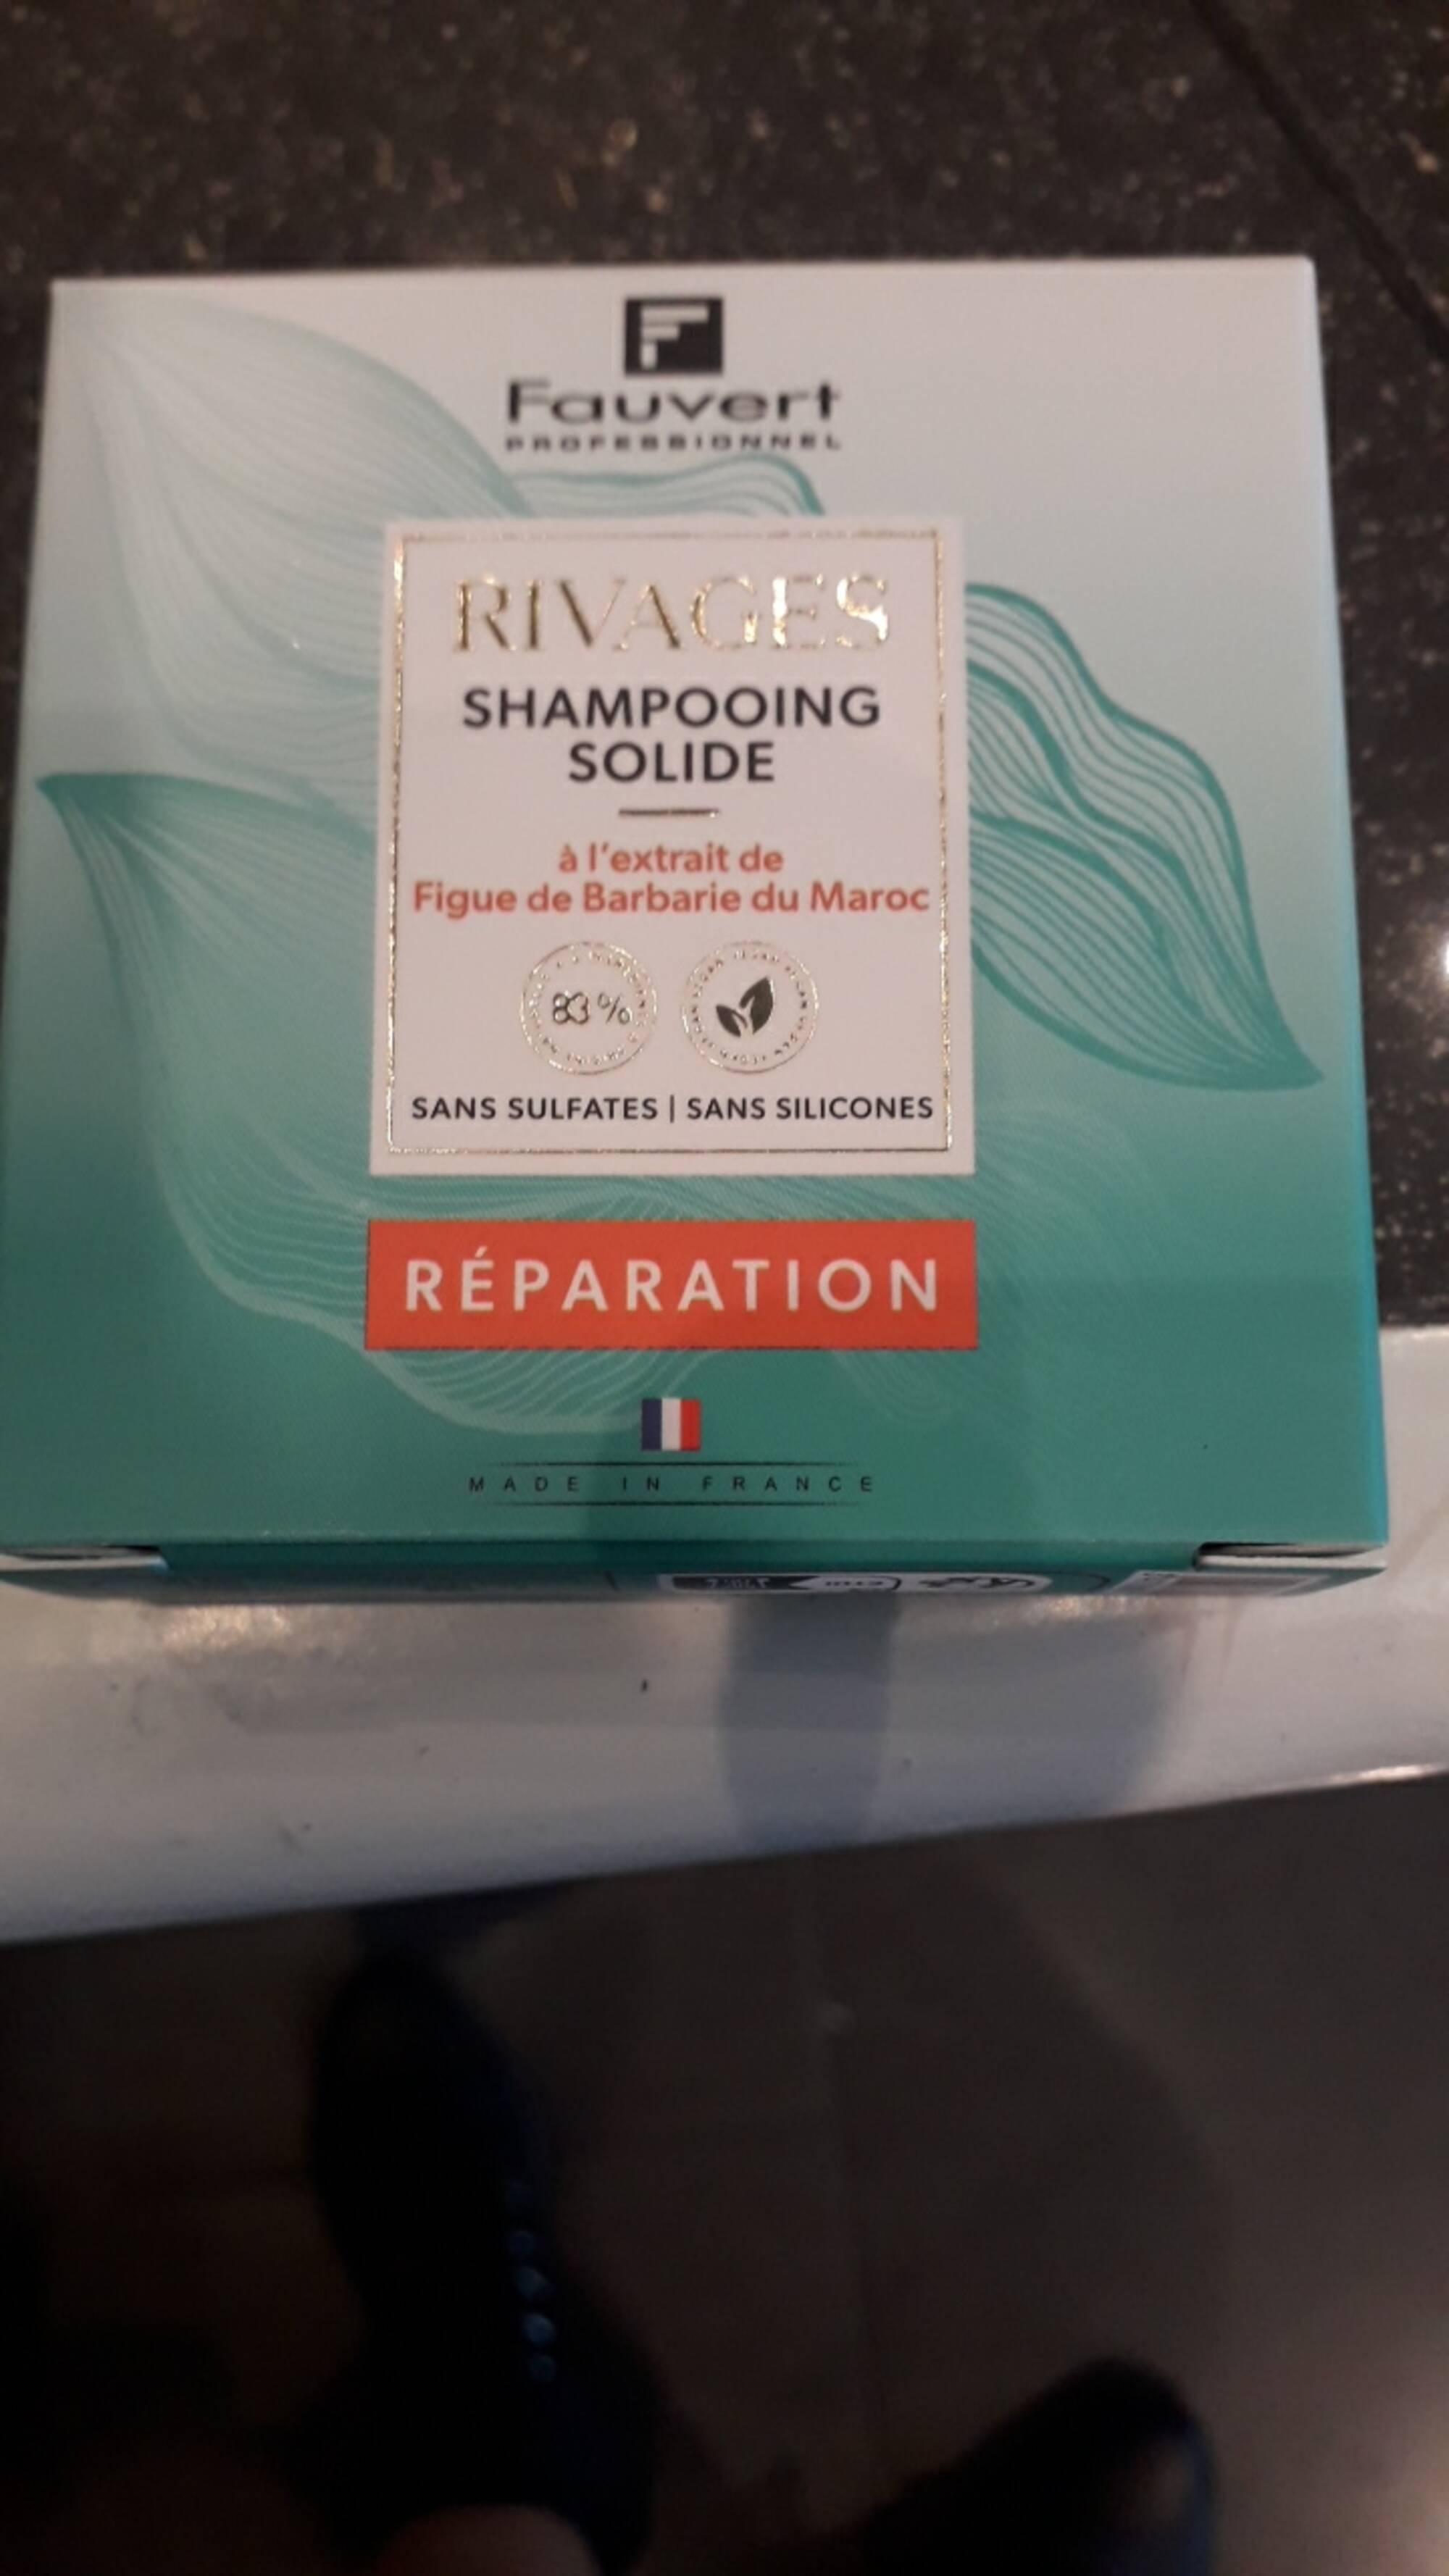 FAUVERT - Rivages - Shampooing solide